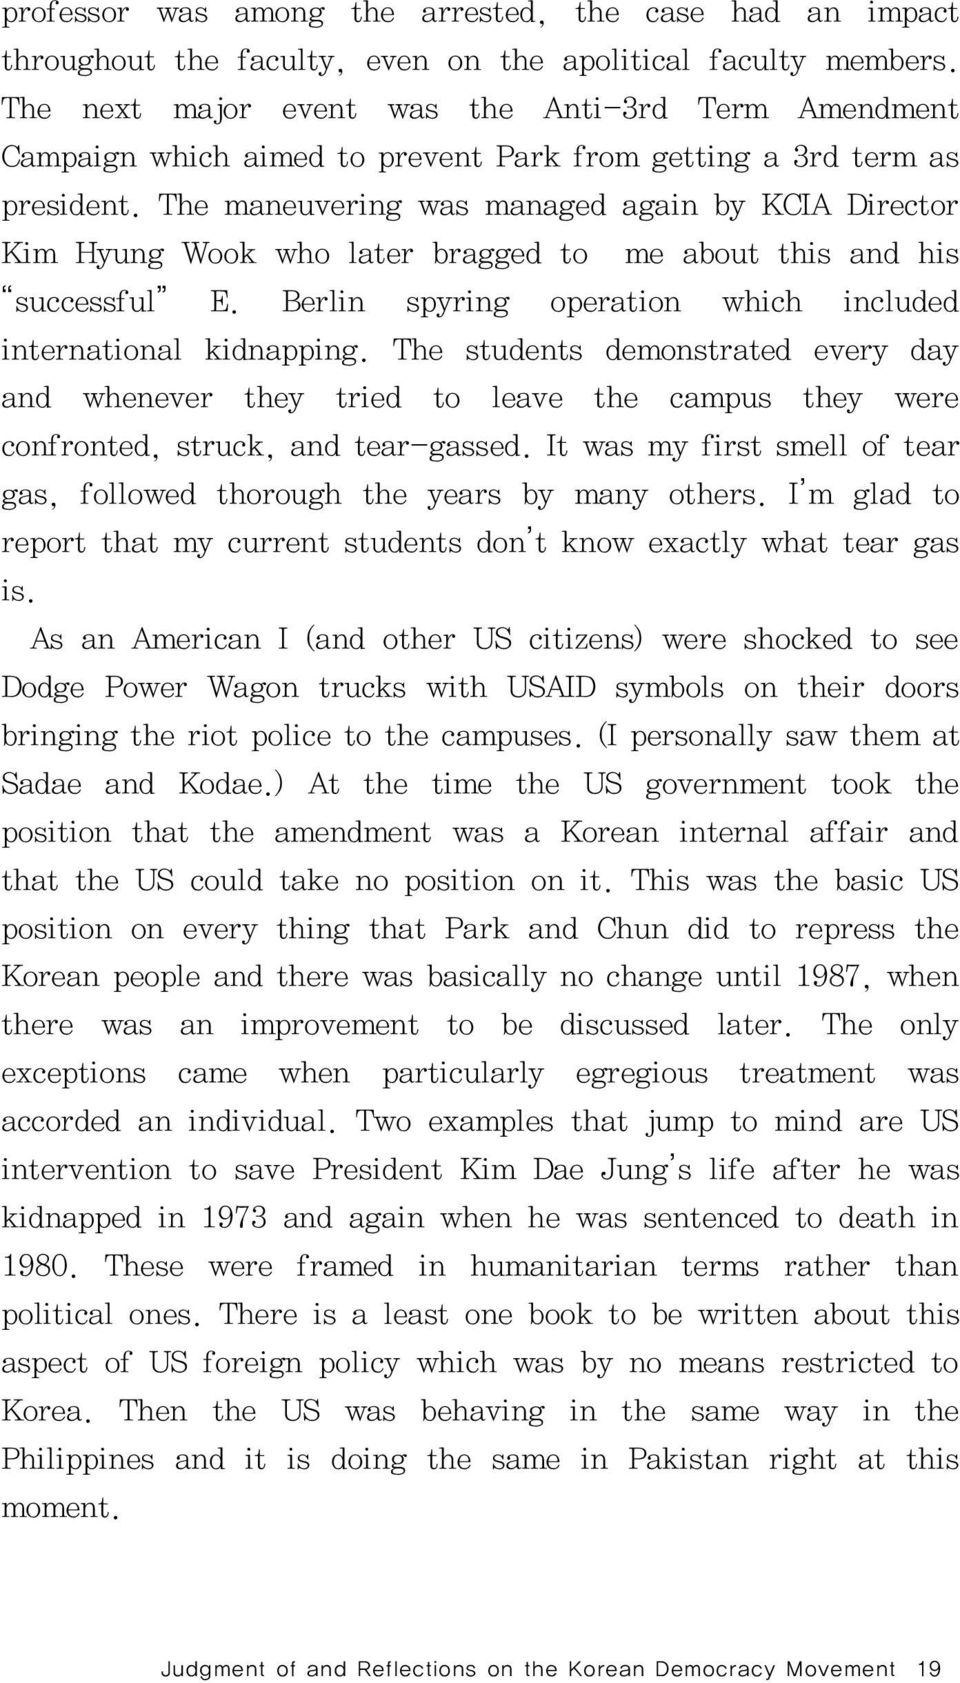 The maneuvering was managed again by KCIA Director Kim Hyung Wook who later bragged to me about this and his successful E. Berlin spyring operation which included international kidnapping.